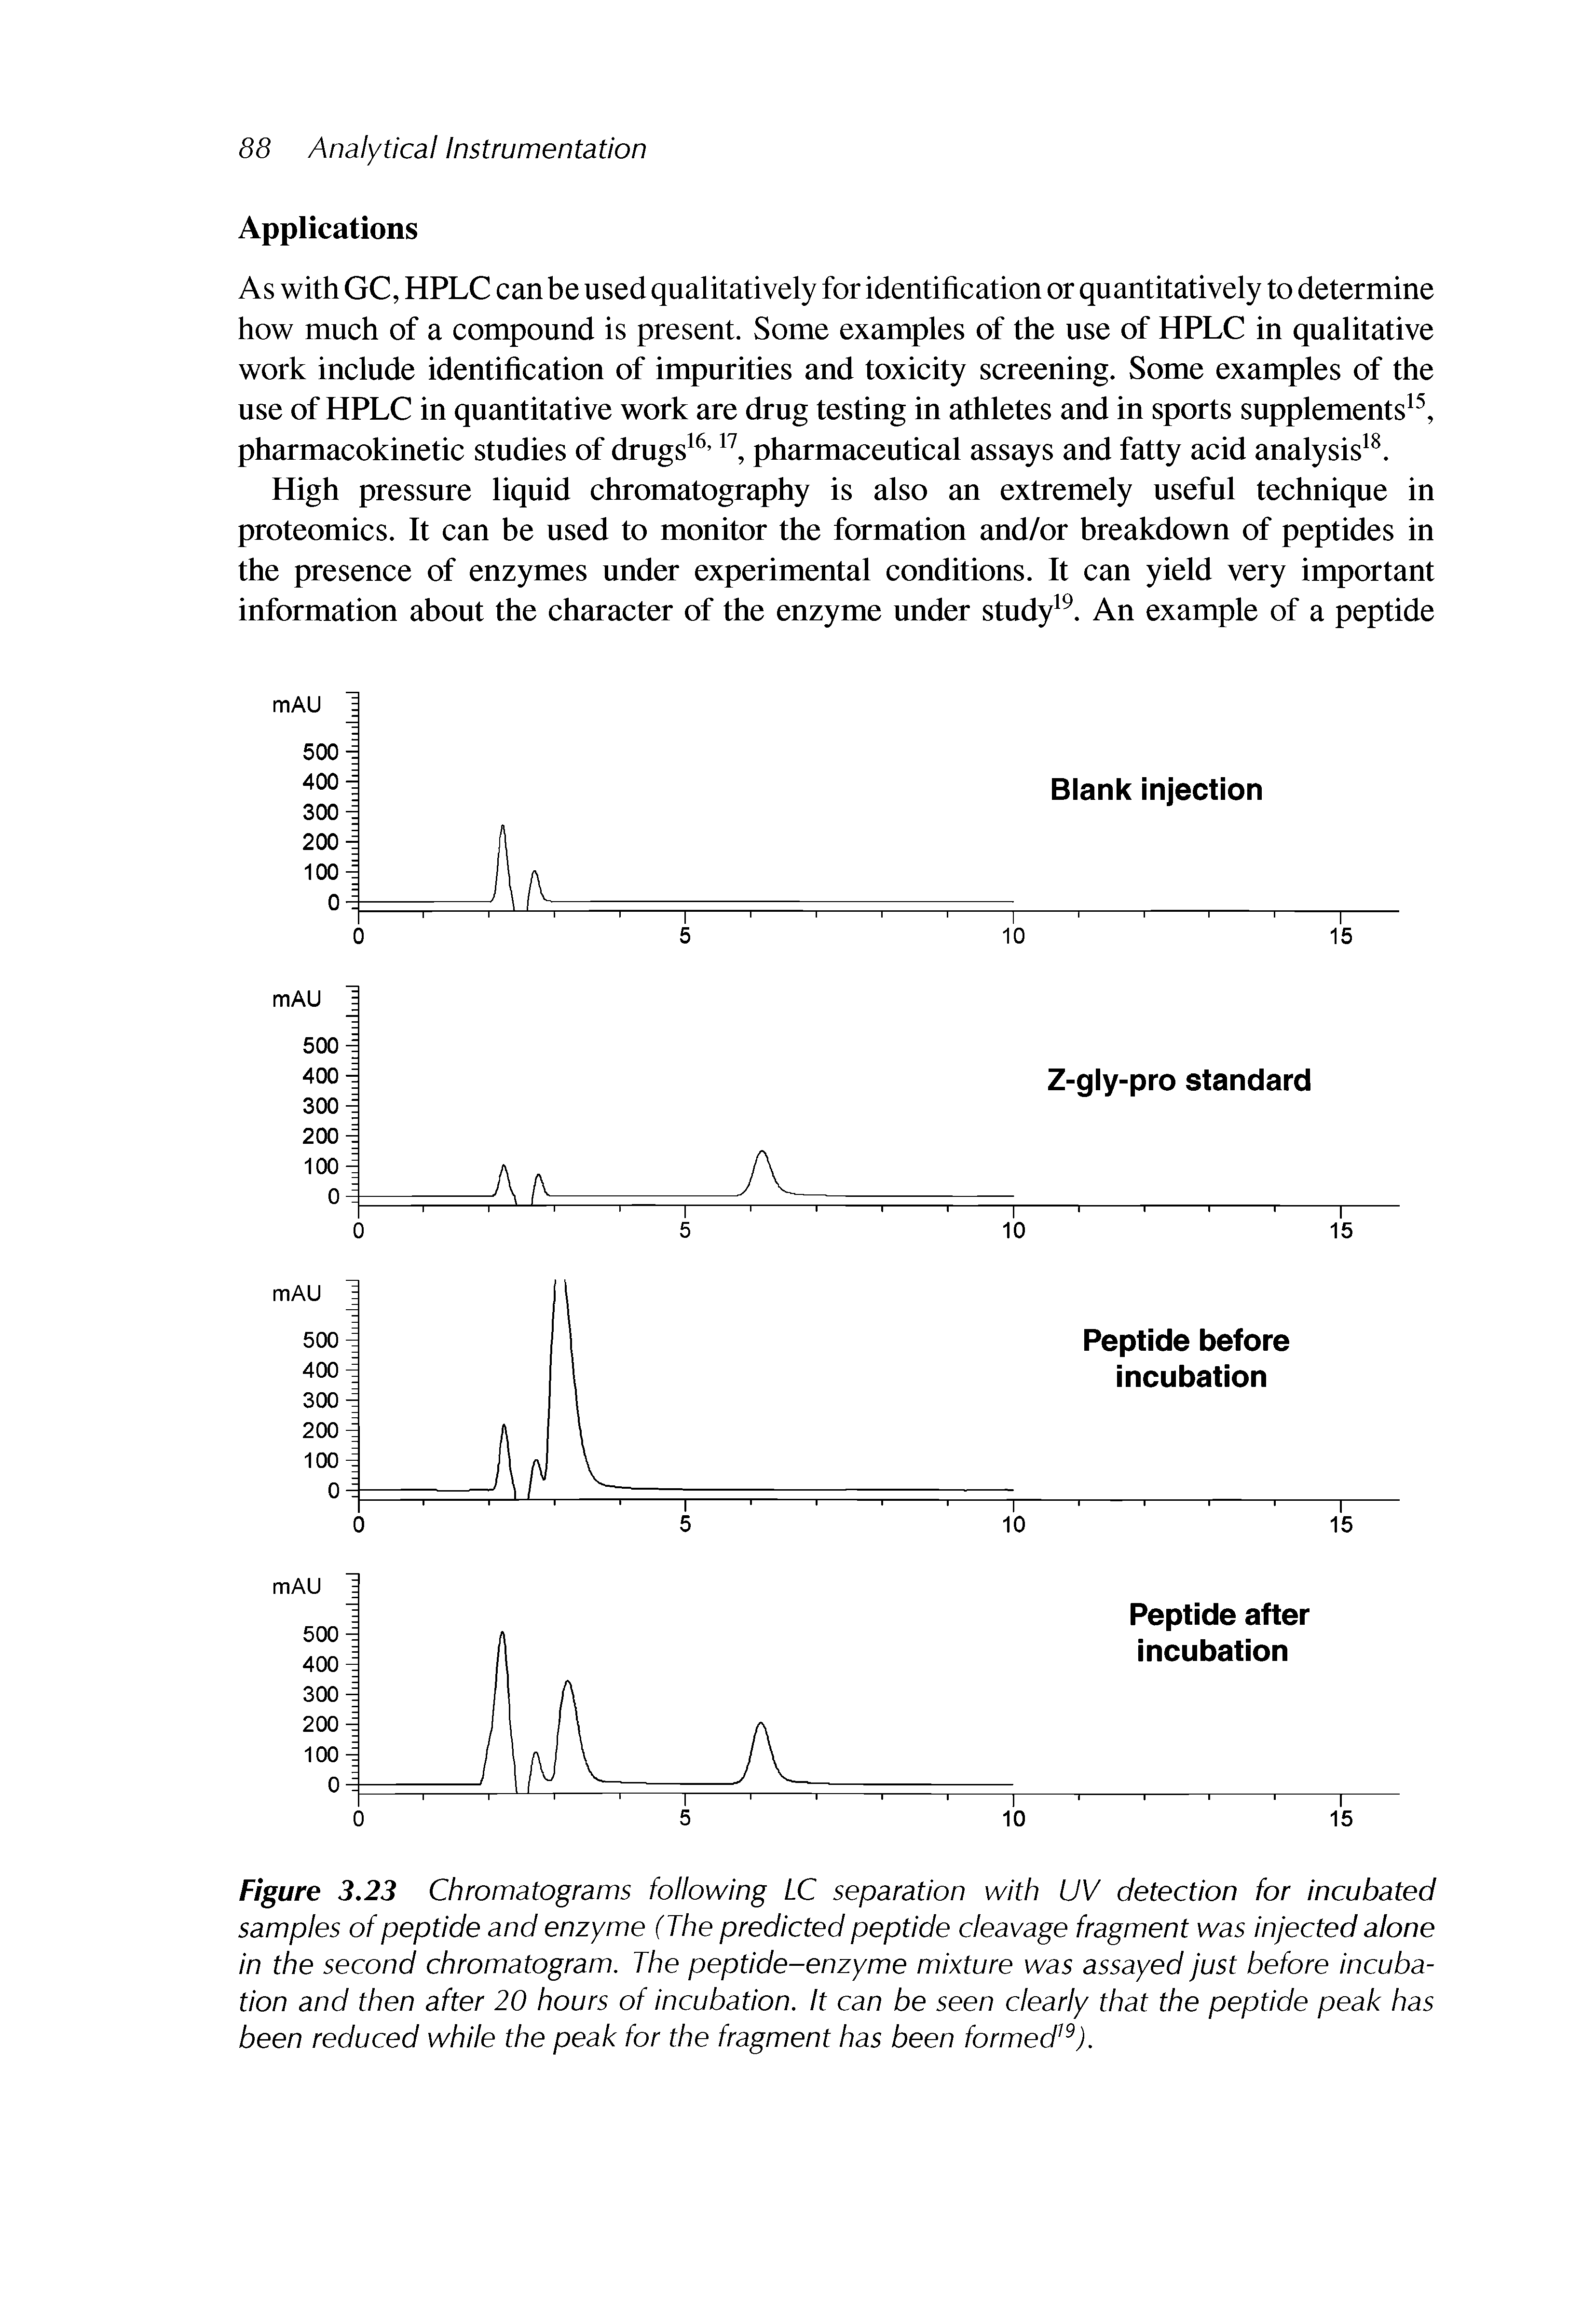 Figure 3.23 Chromatograms following LC separation with UV detection for incubated samples of peptide and enzyme (The predicted peptide cleavage fragment was injected alone in the second chromatogram. The peptide-enzyme mixture was assayed just before incubation and then after 20 hours of incubation. It can be seen clearly that the peptide peak has been reduced while the peak for the fragment has been formed ).